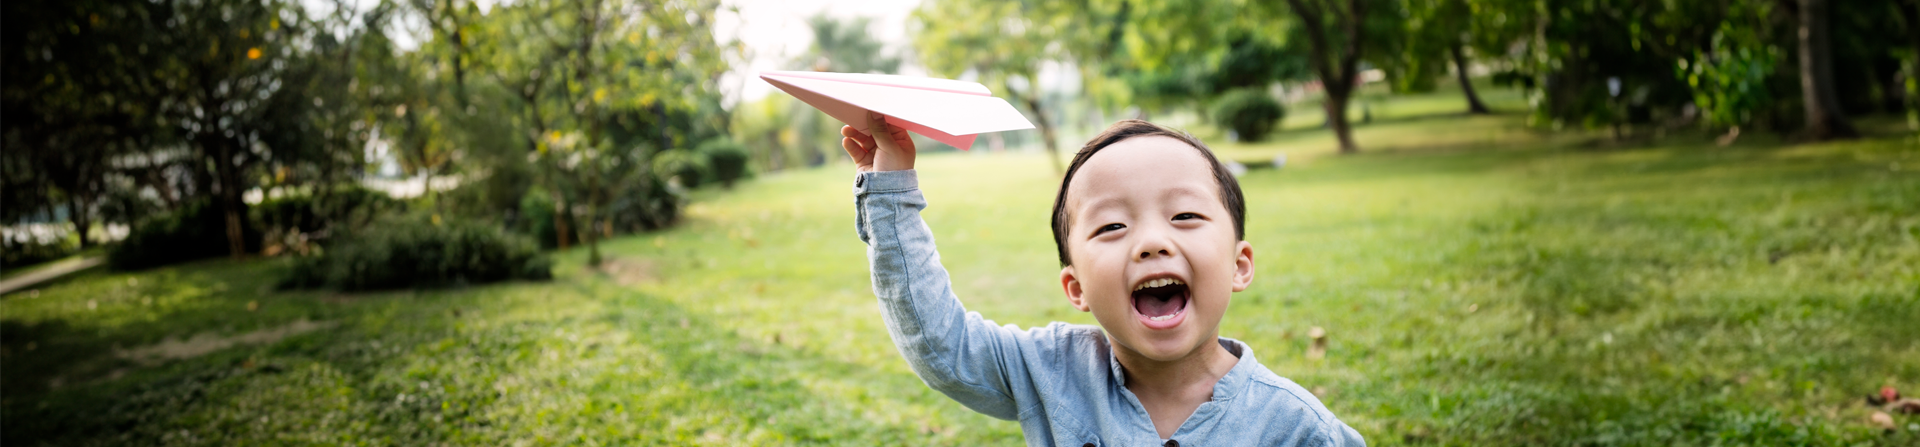 Boy plays with a paper airplane in front of a sunny open field